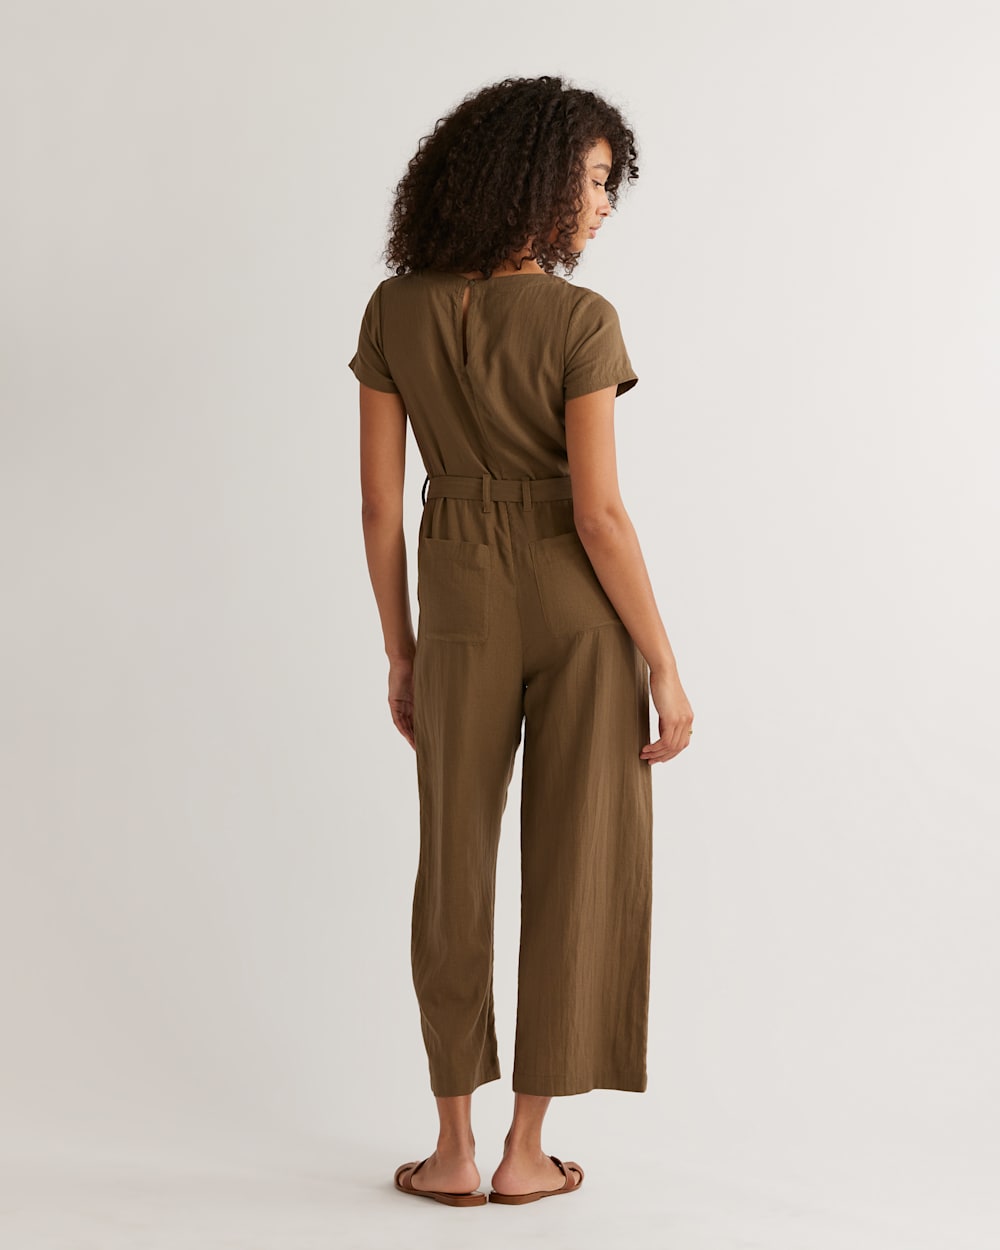 ALTERNATE VIEW OF WOMEN'S LILA LINEN-BLEND JUMPSUIT IN DRIED BASIL image number 3